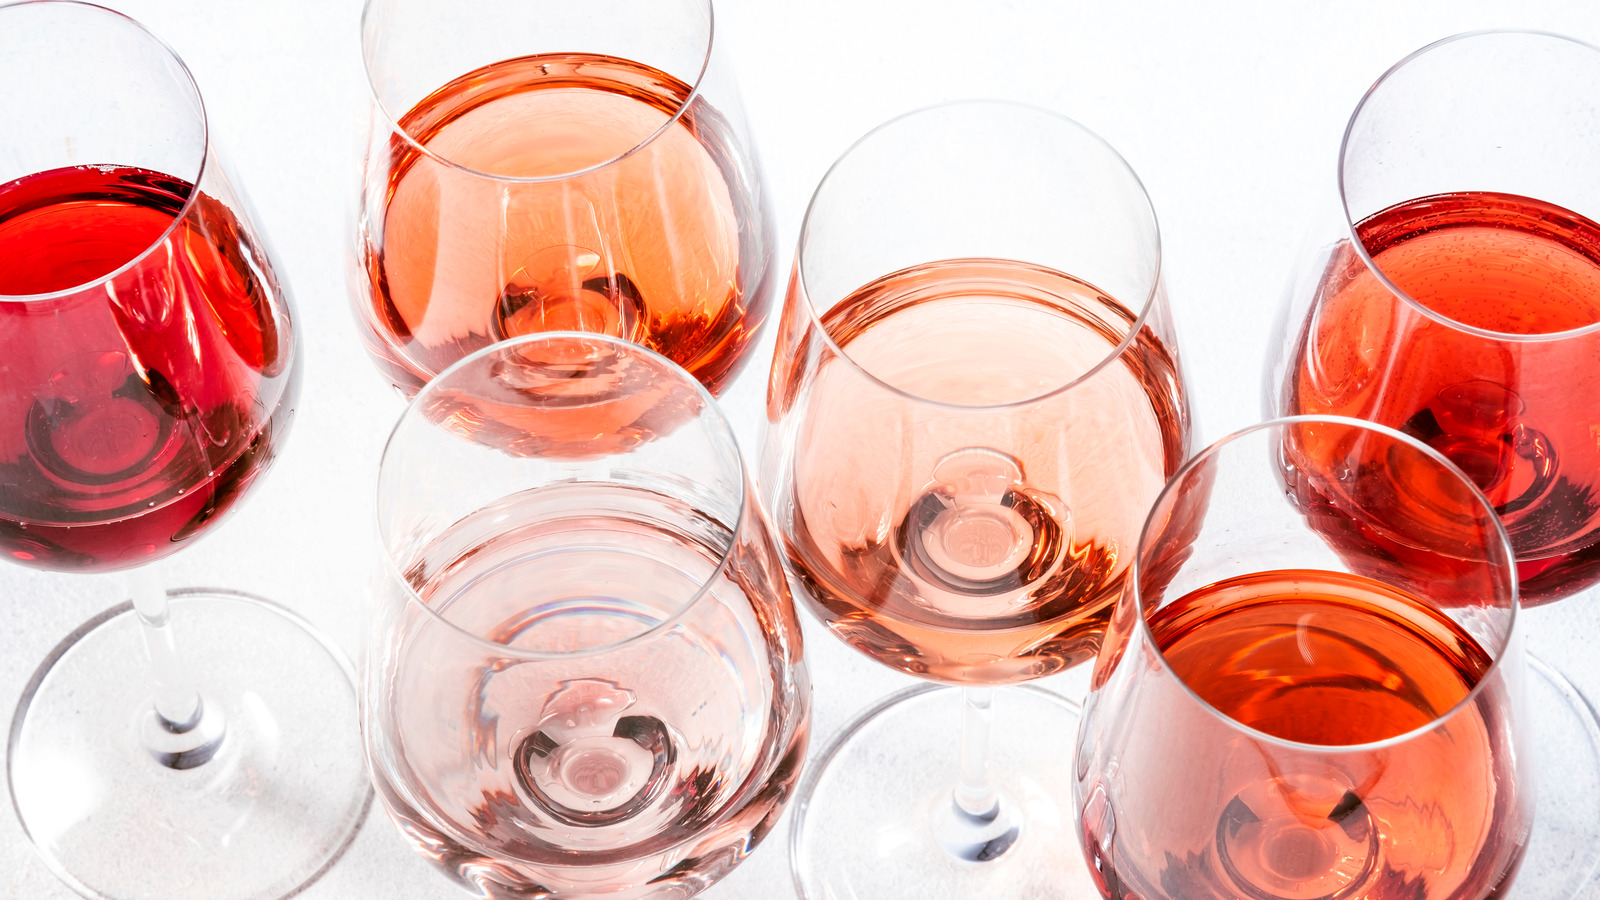 7 Best Wine Glasses (Ranked and Reviewed) - Honest Wine Reviews